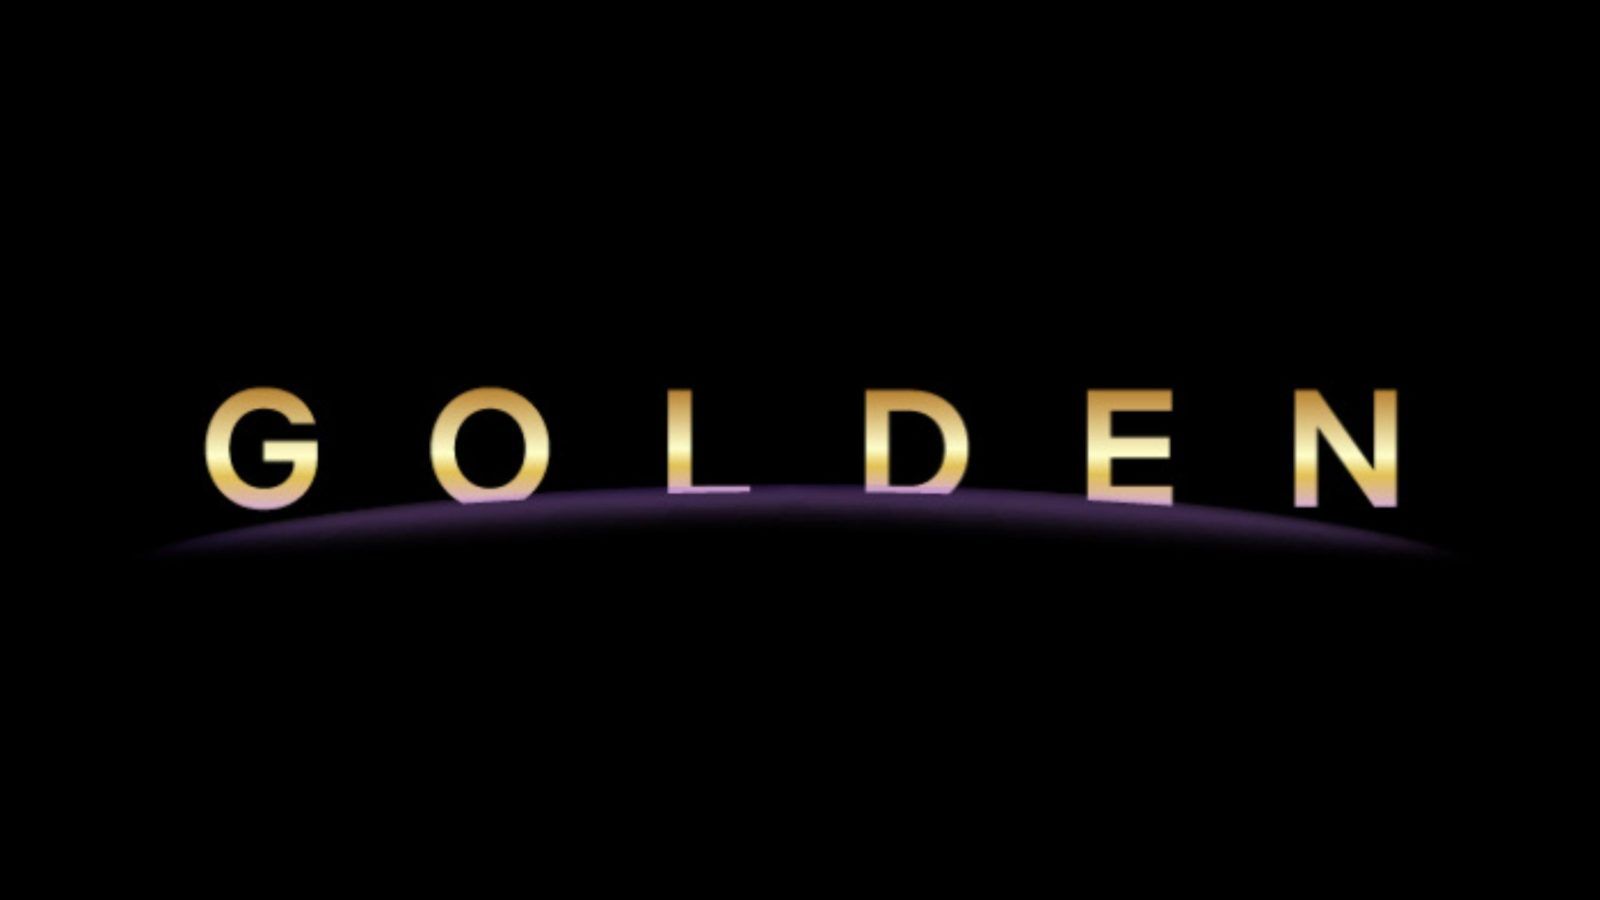 Netflix launches Golden, a new social media channel that celebrates the Asian community